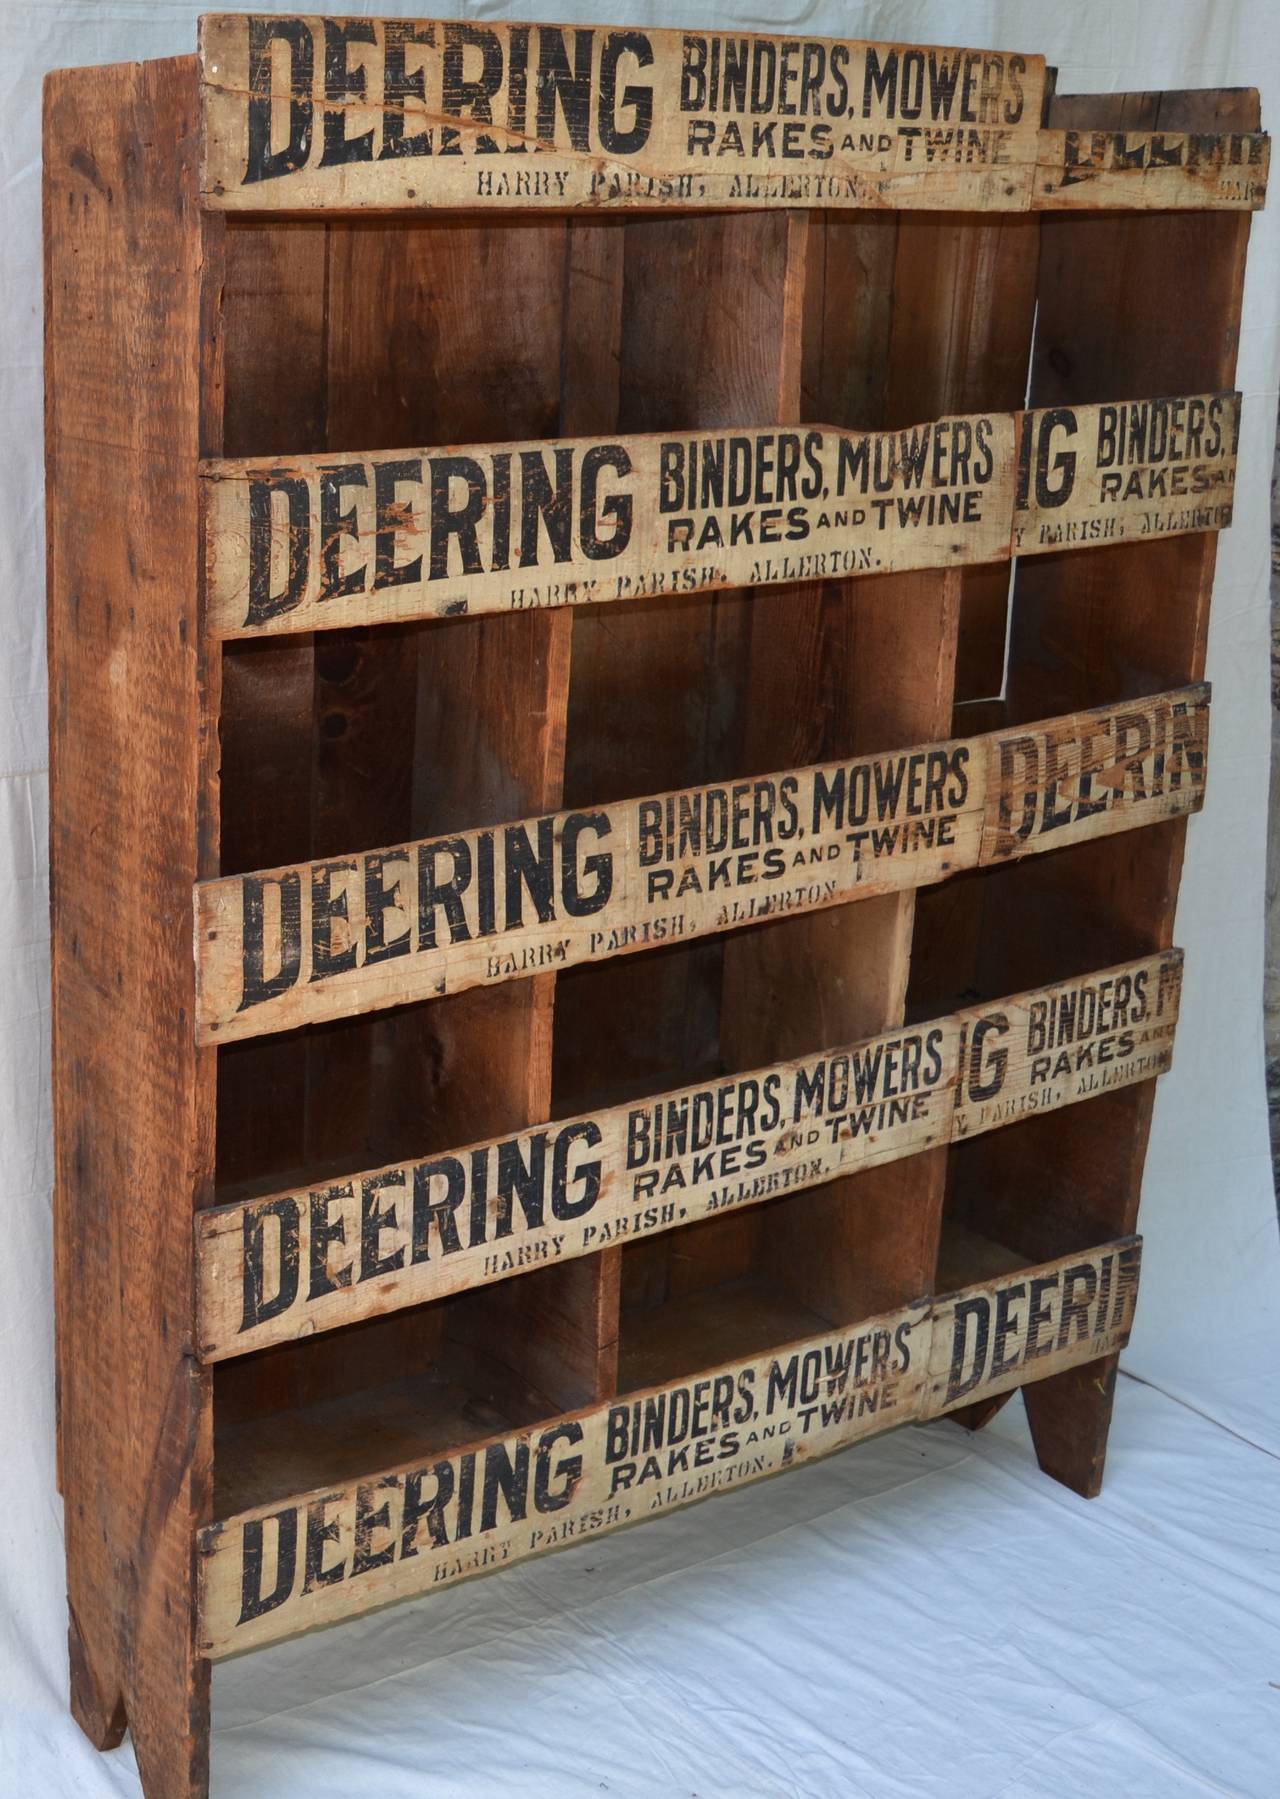 Beautifully graphic storage cabinet from a farm supply store. A well-made inventory sorting cabinet with collaged wooden advertising signs forming the front of the piece. Triangular cutouts are used on the side panels giving additional visual